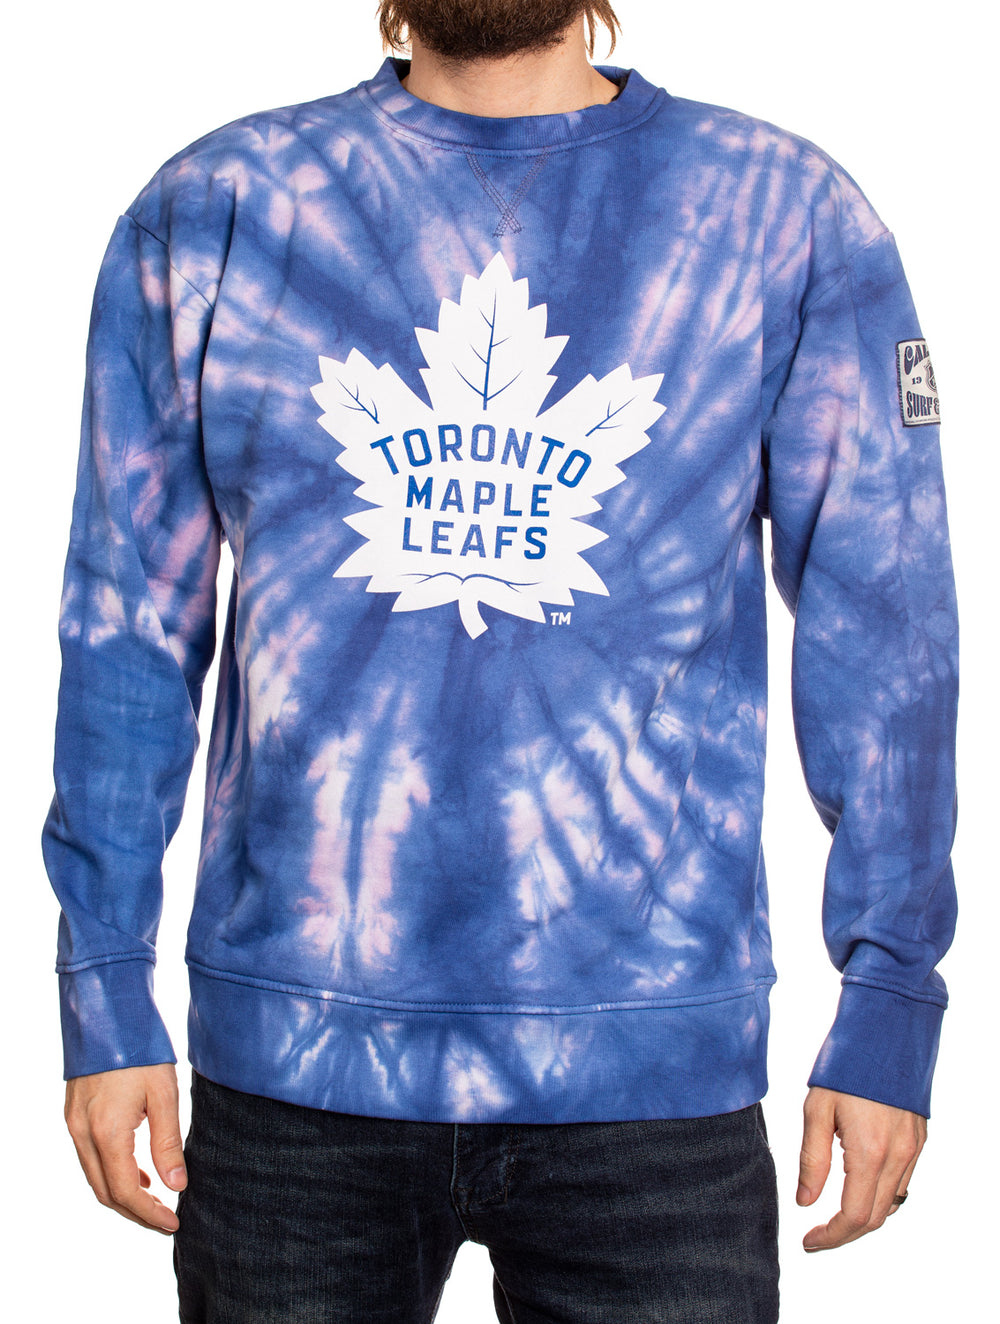 NHL Toronto Maple Leafs Specialized 2022 Concepts With 105 Years  Anniversary Logo Kits 3D Hoodie - Ecomhao Store